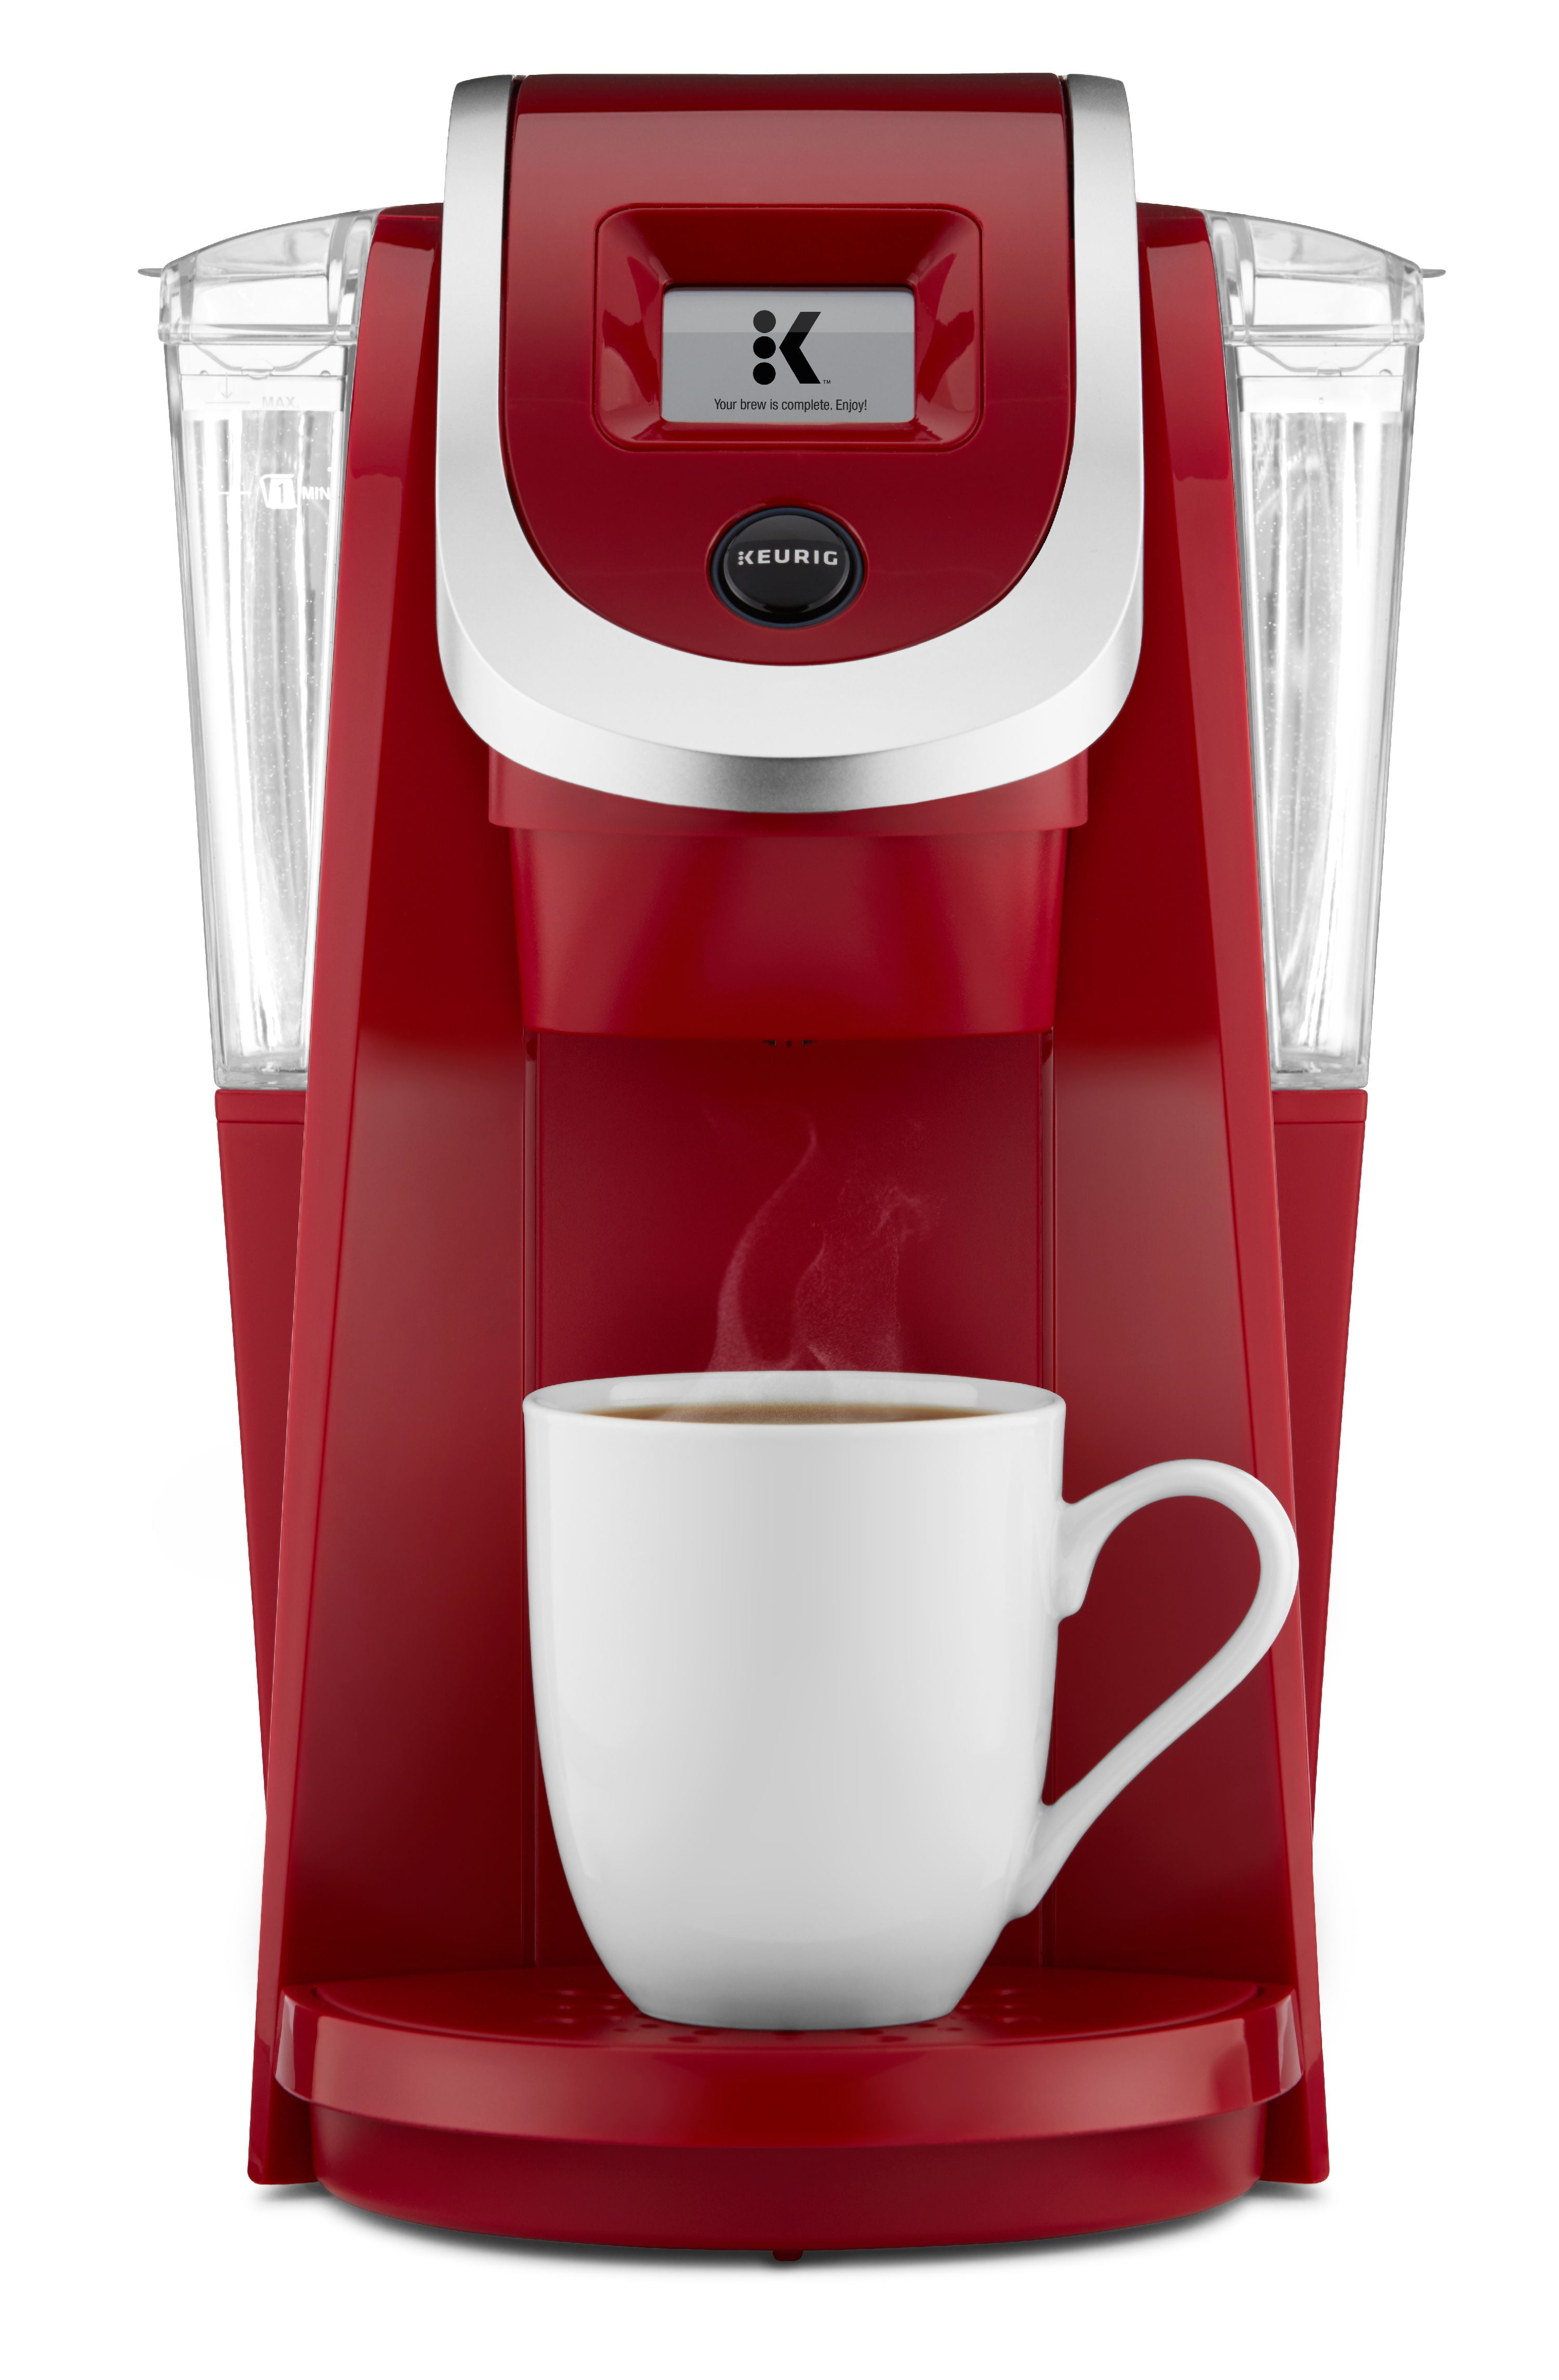 Keurig K-Cafe Review and Demo 